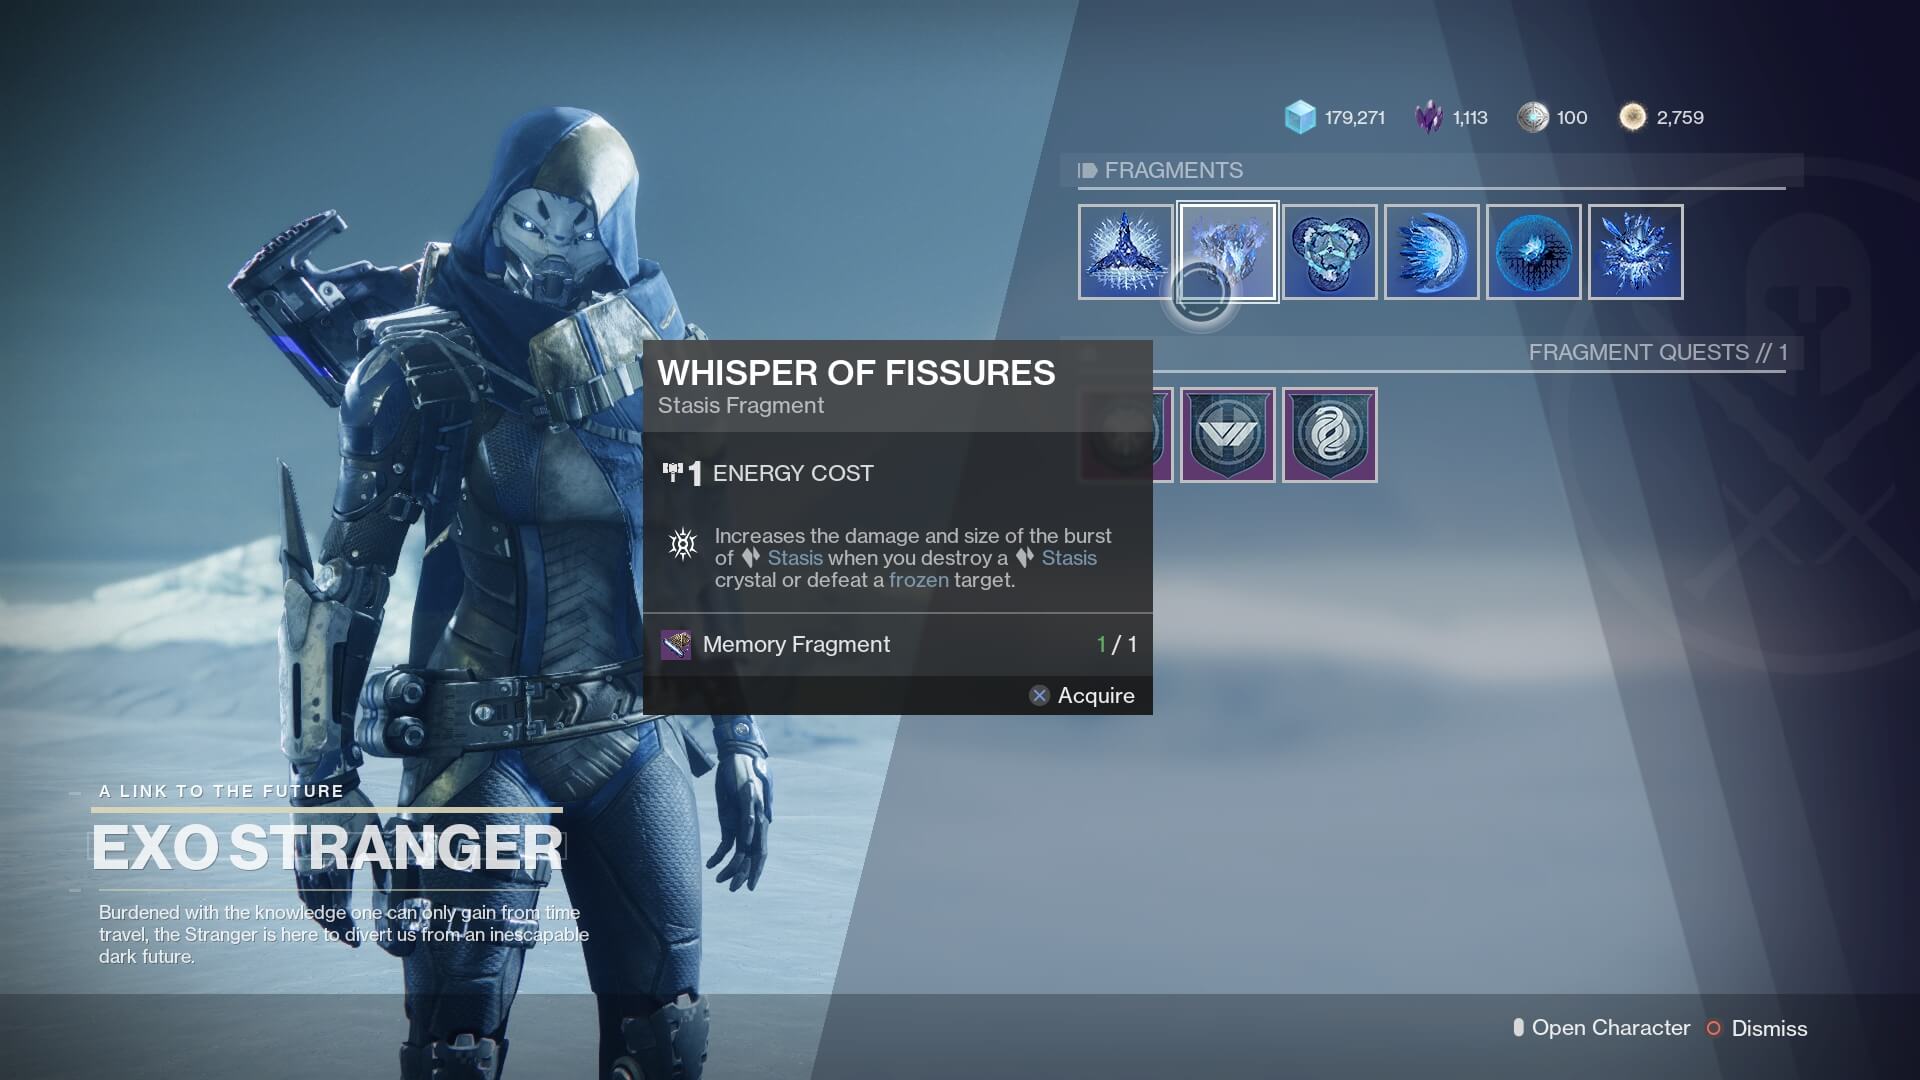 The Exo Stranger on an icy field, offering Fragments